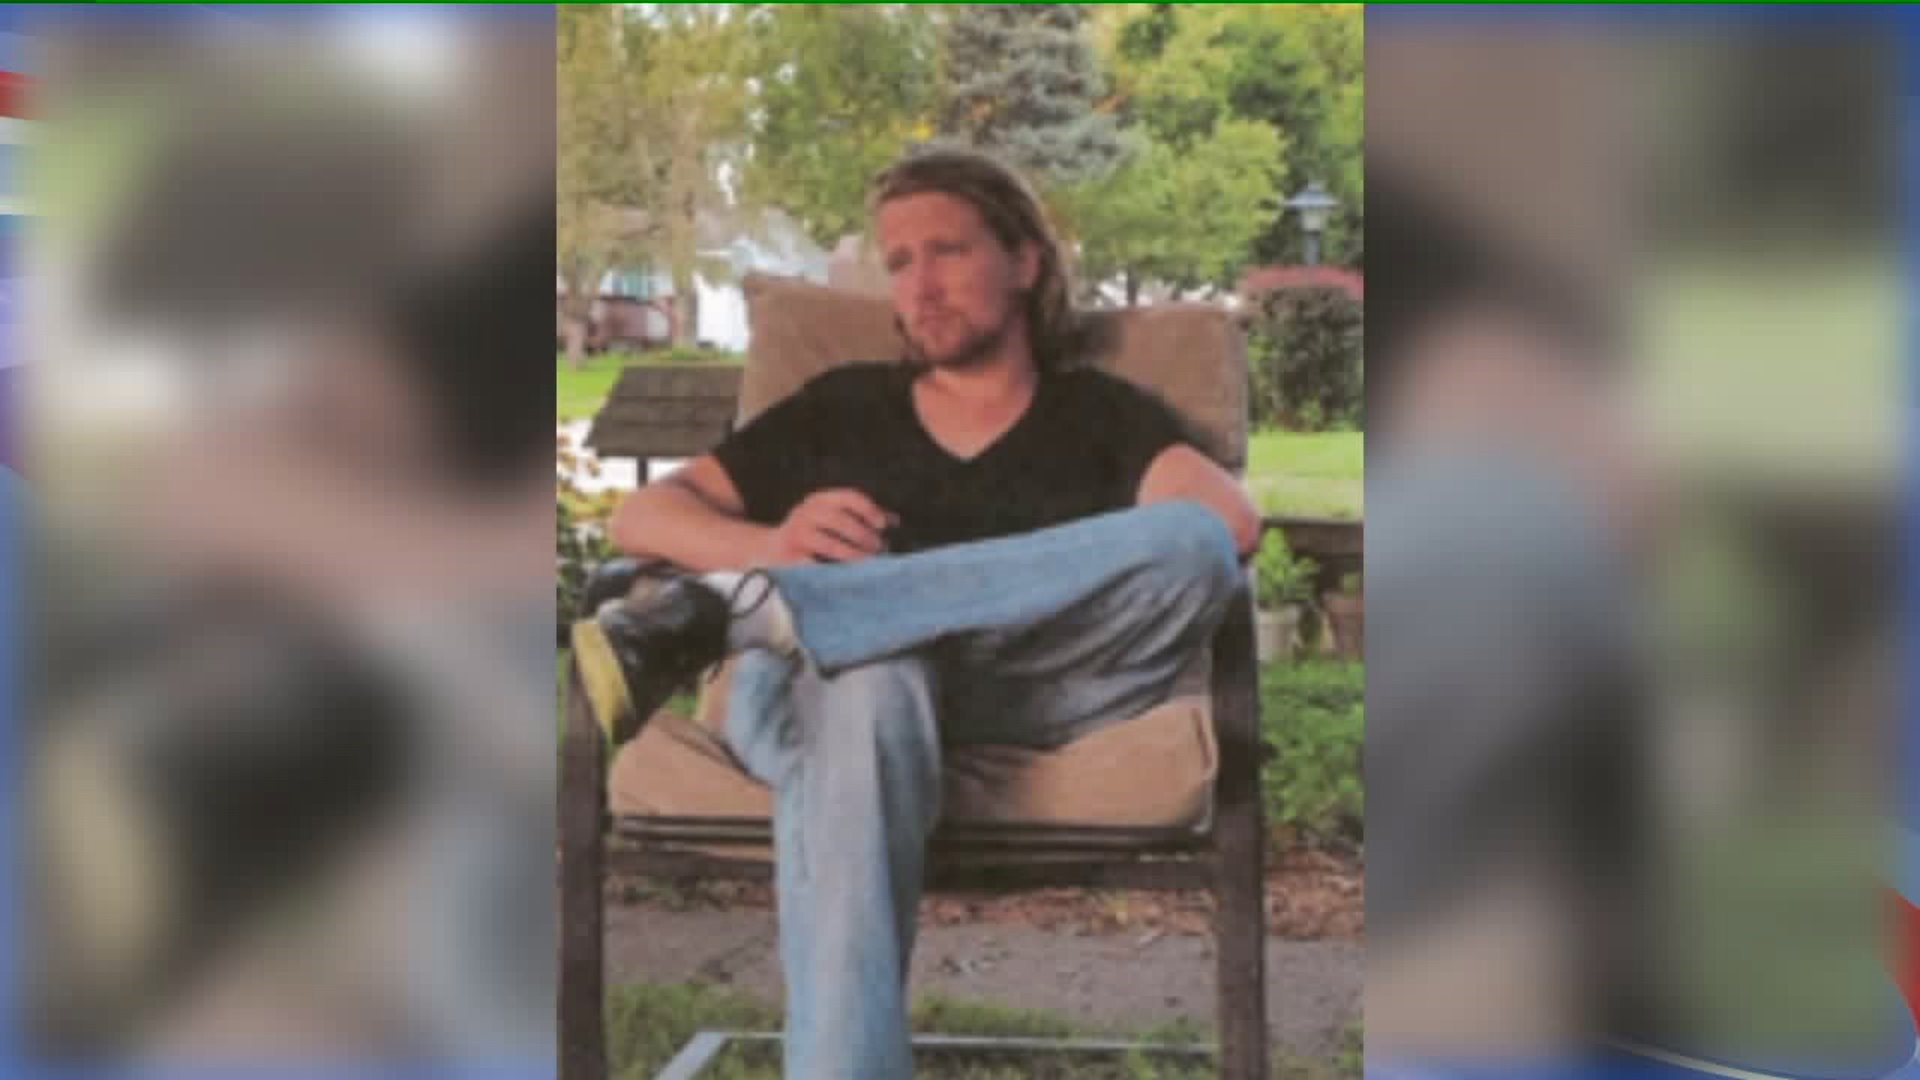 Disappearance of 22-year-old Bettendorf man